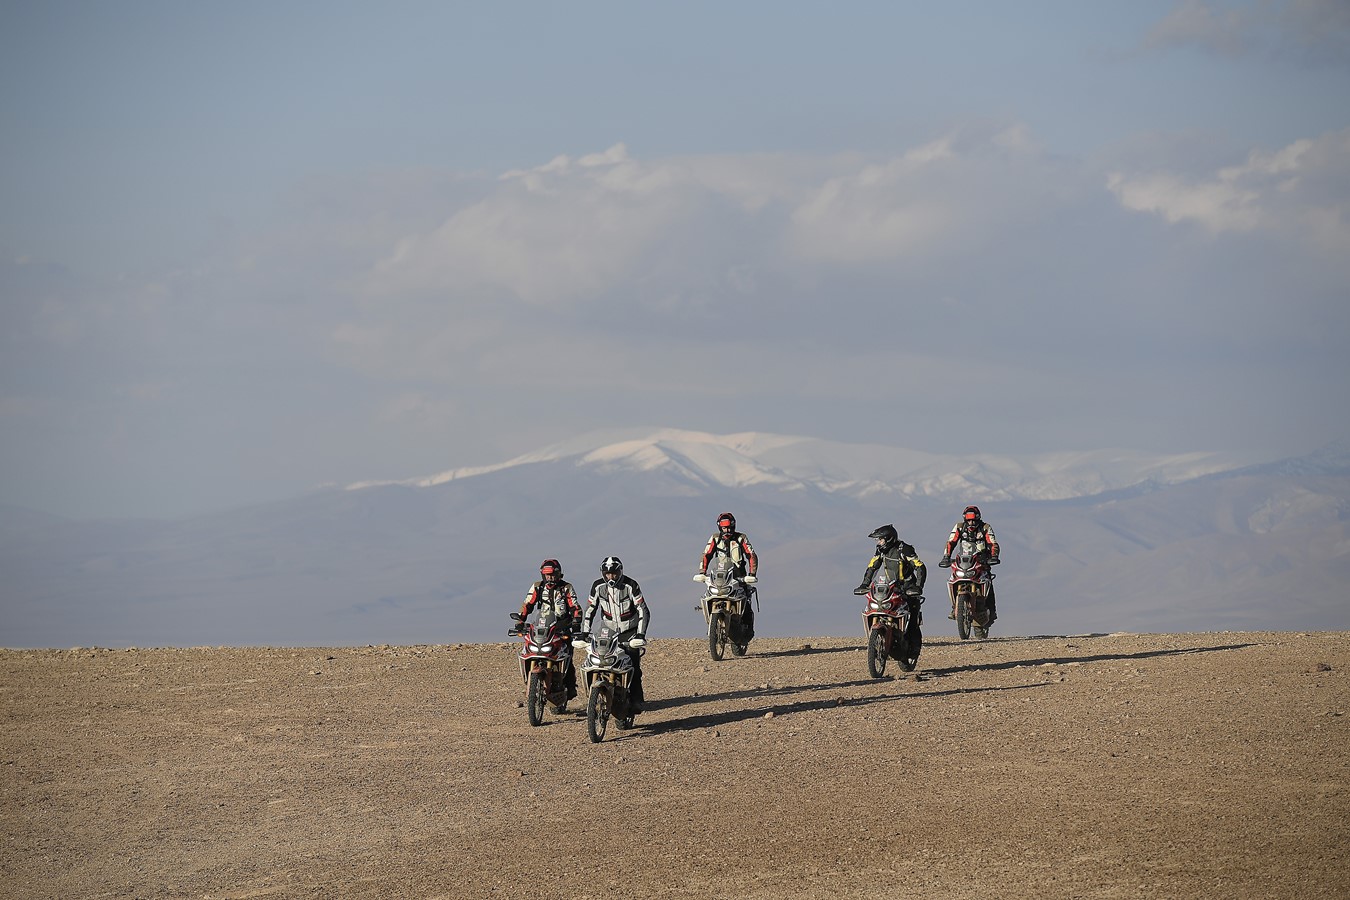 Africa Twin reaches new heights 